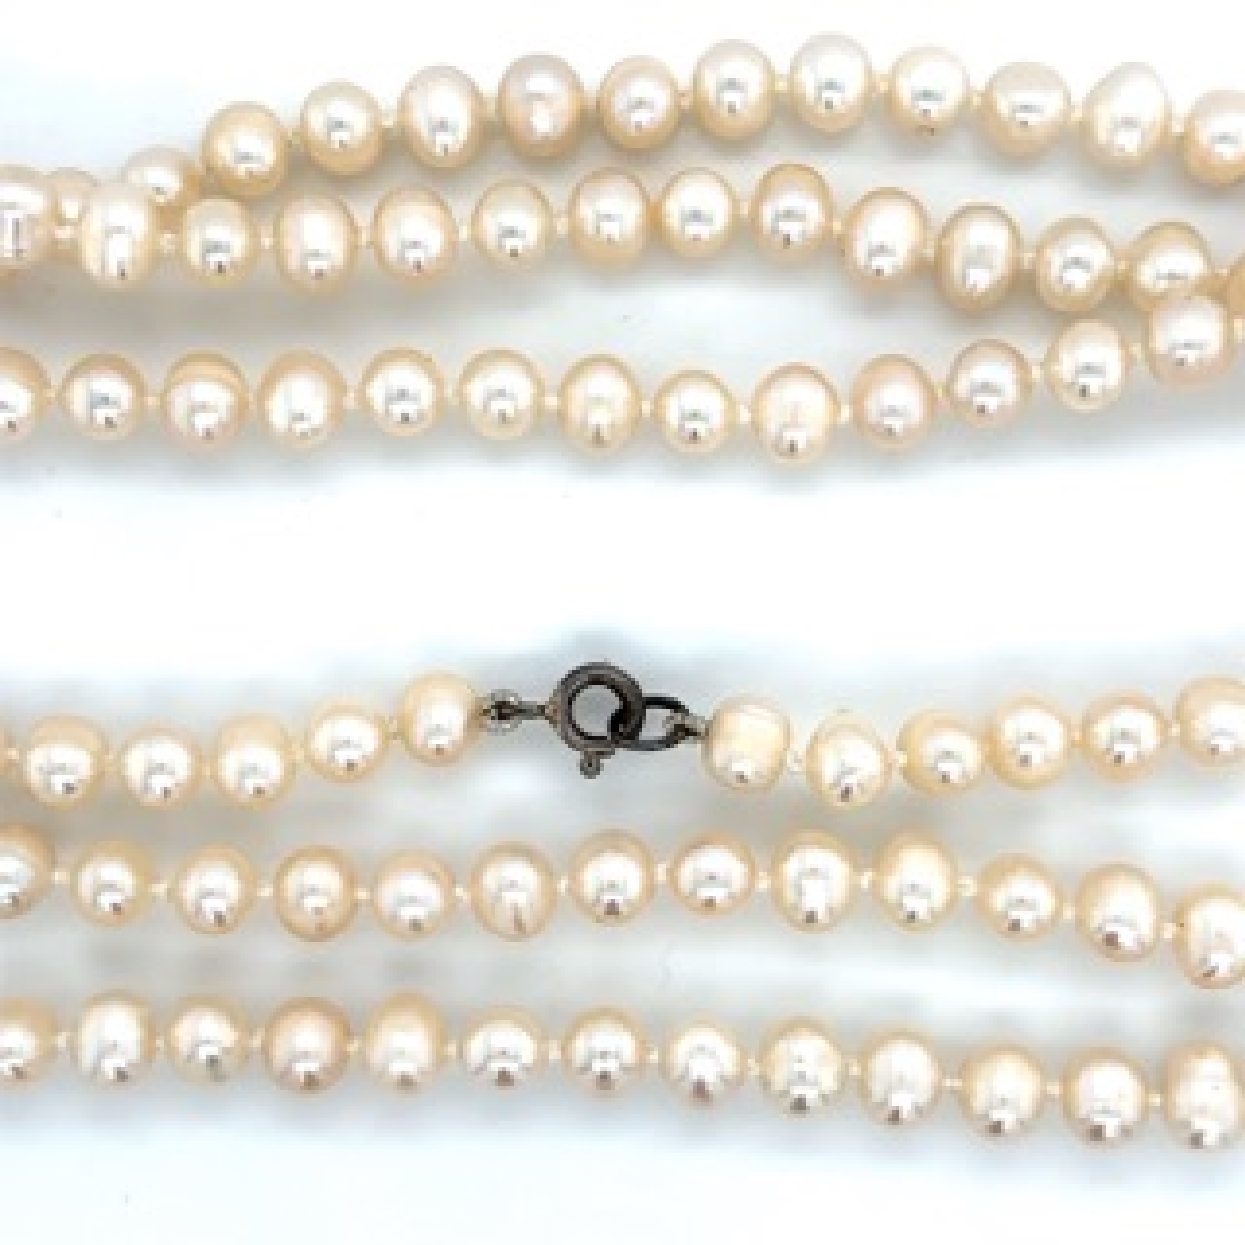 Single Strand of Fresh Water Pearls with a Sterling Silver Clasp

5 mm 
36 Inches 